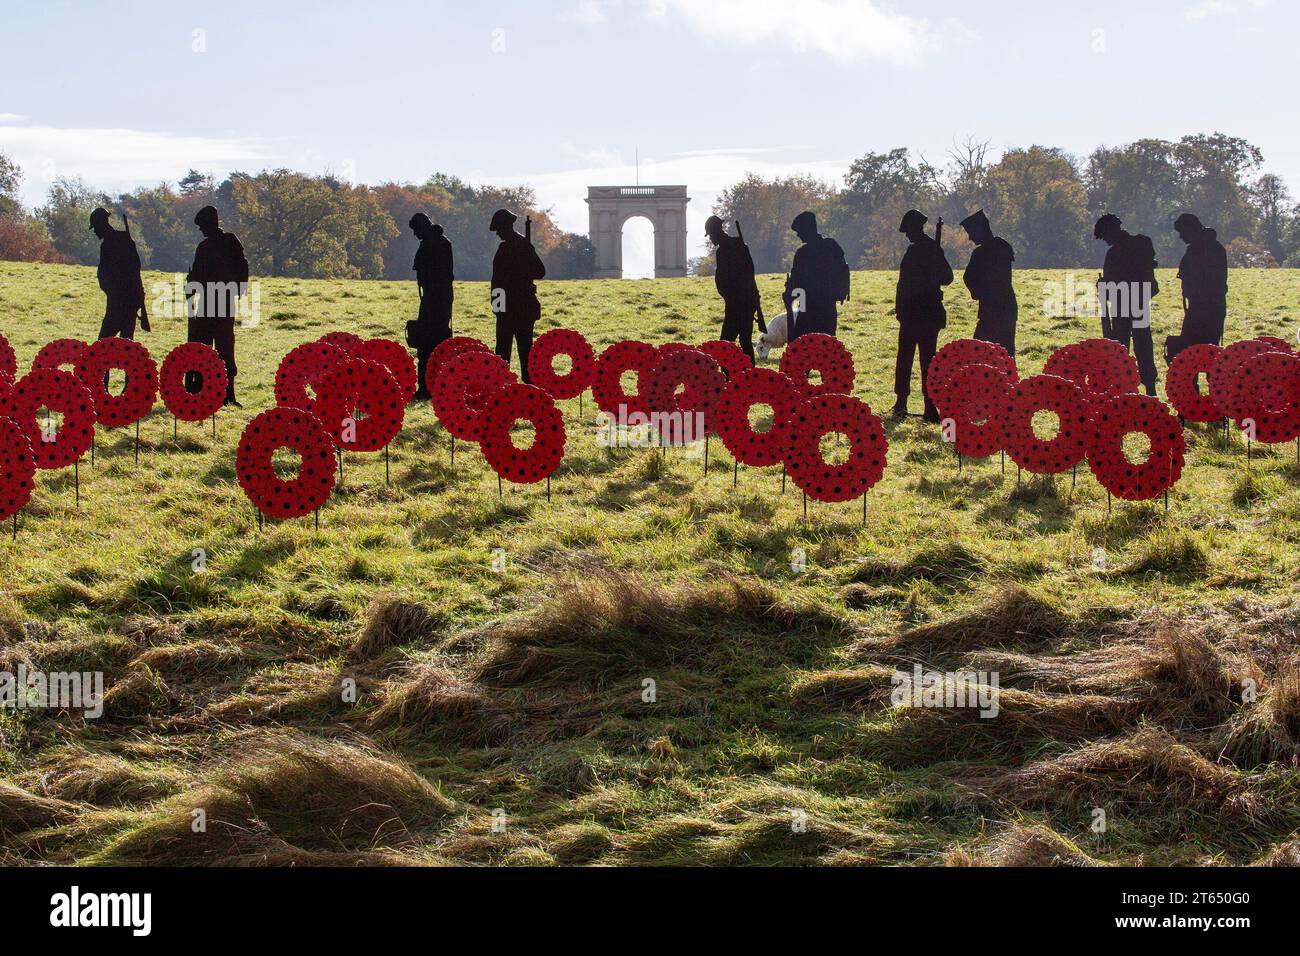 soldier silhouettes and poppies handmade by volunteers from recycled materials as part of the STANDING WITH GIANTS Remembrance Day art installation at Stock Photo